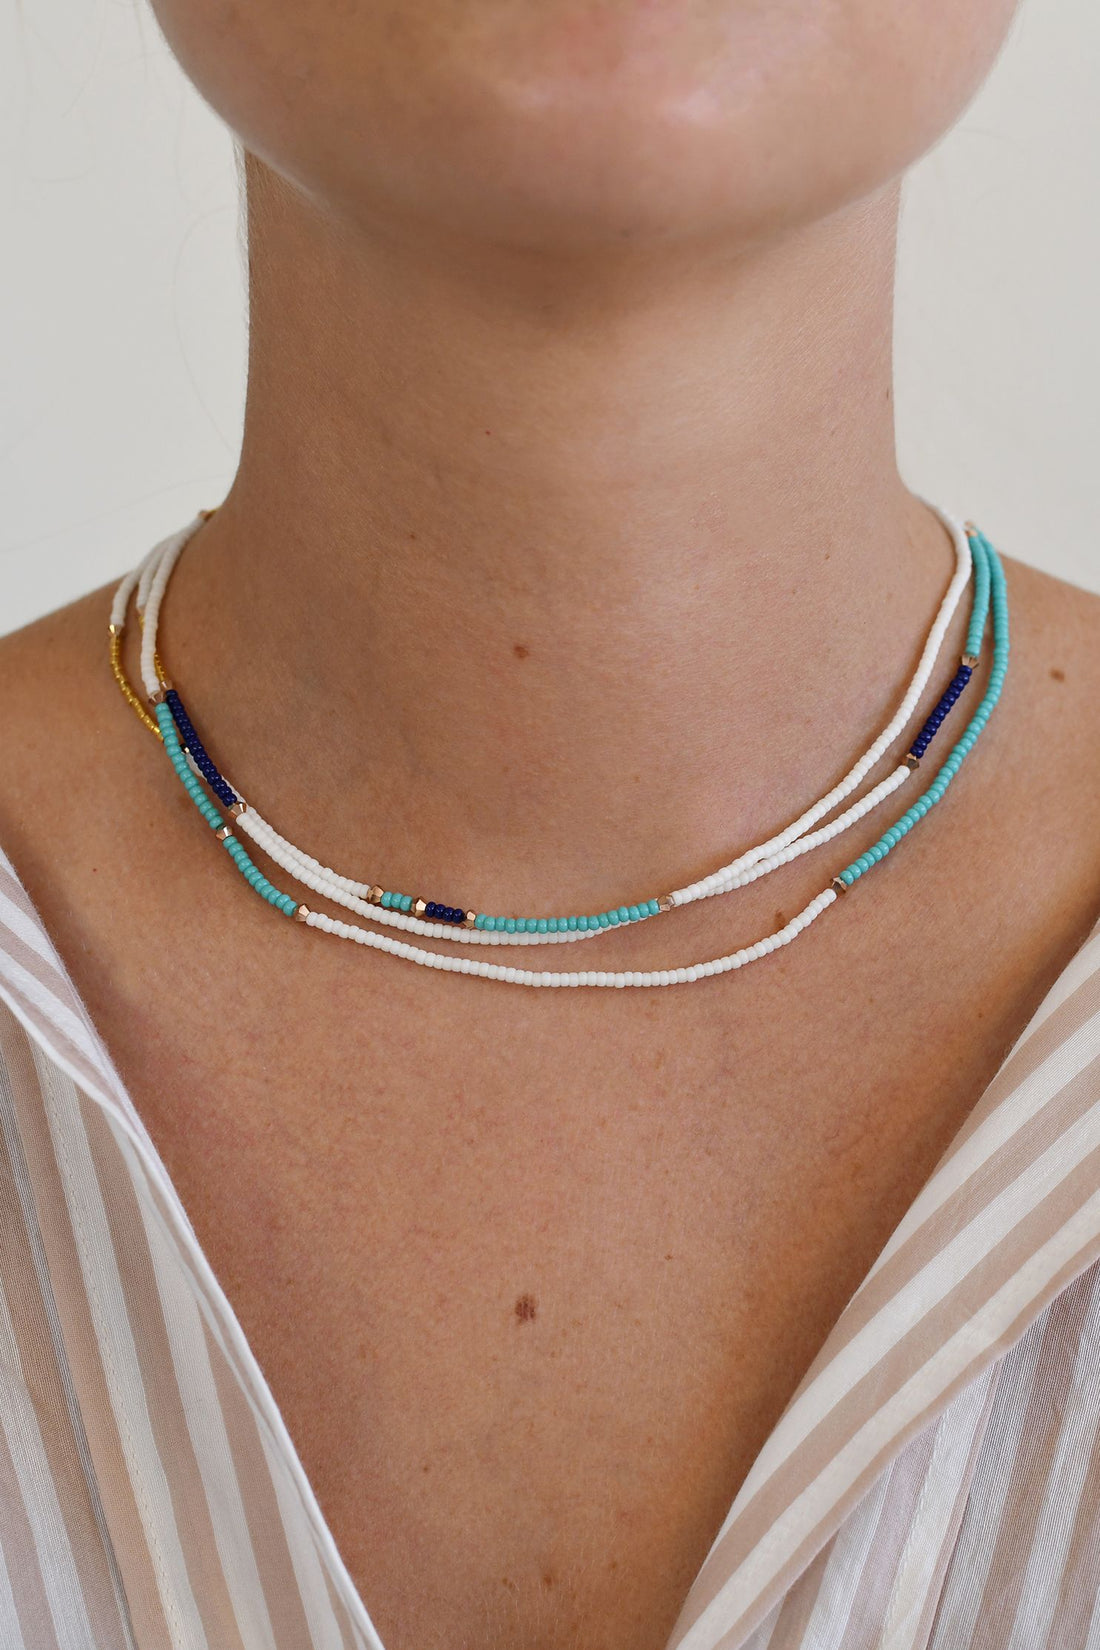 Long Endito Multi Wrap Necklace - TURQUOISE/OFF WHITE/NAVY/ROSE GOLD/GOLD